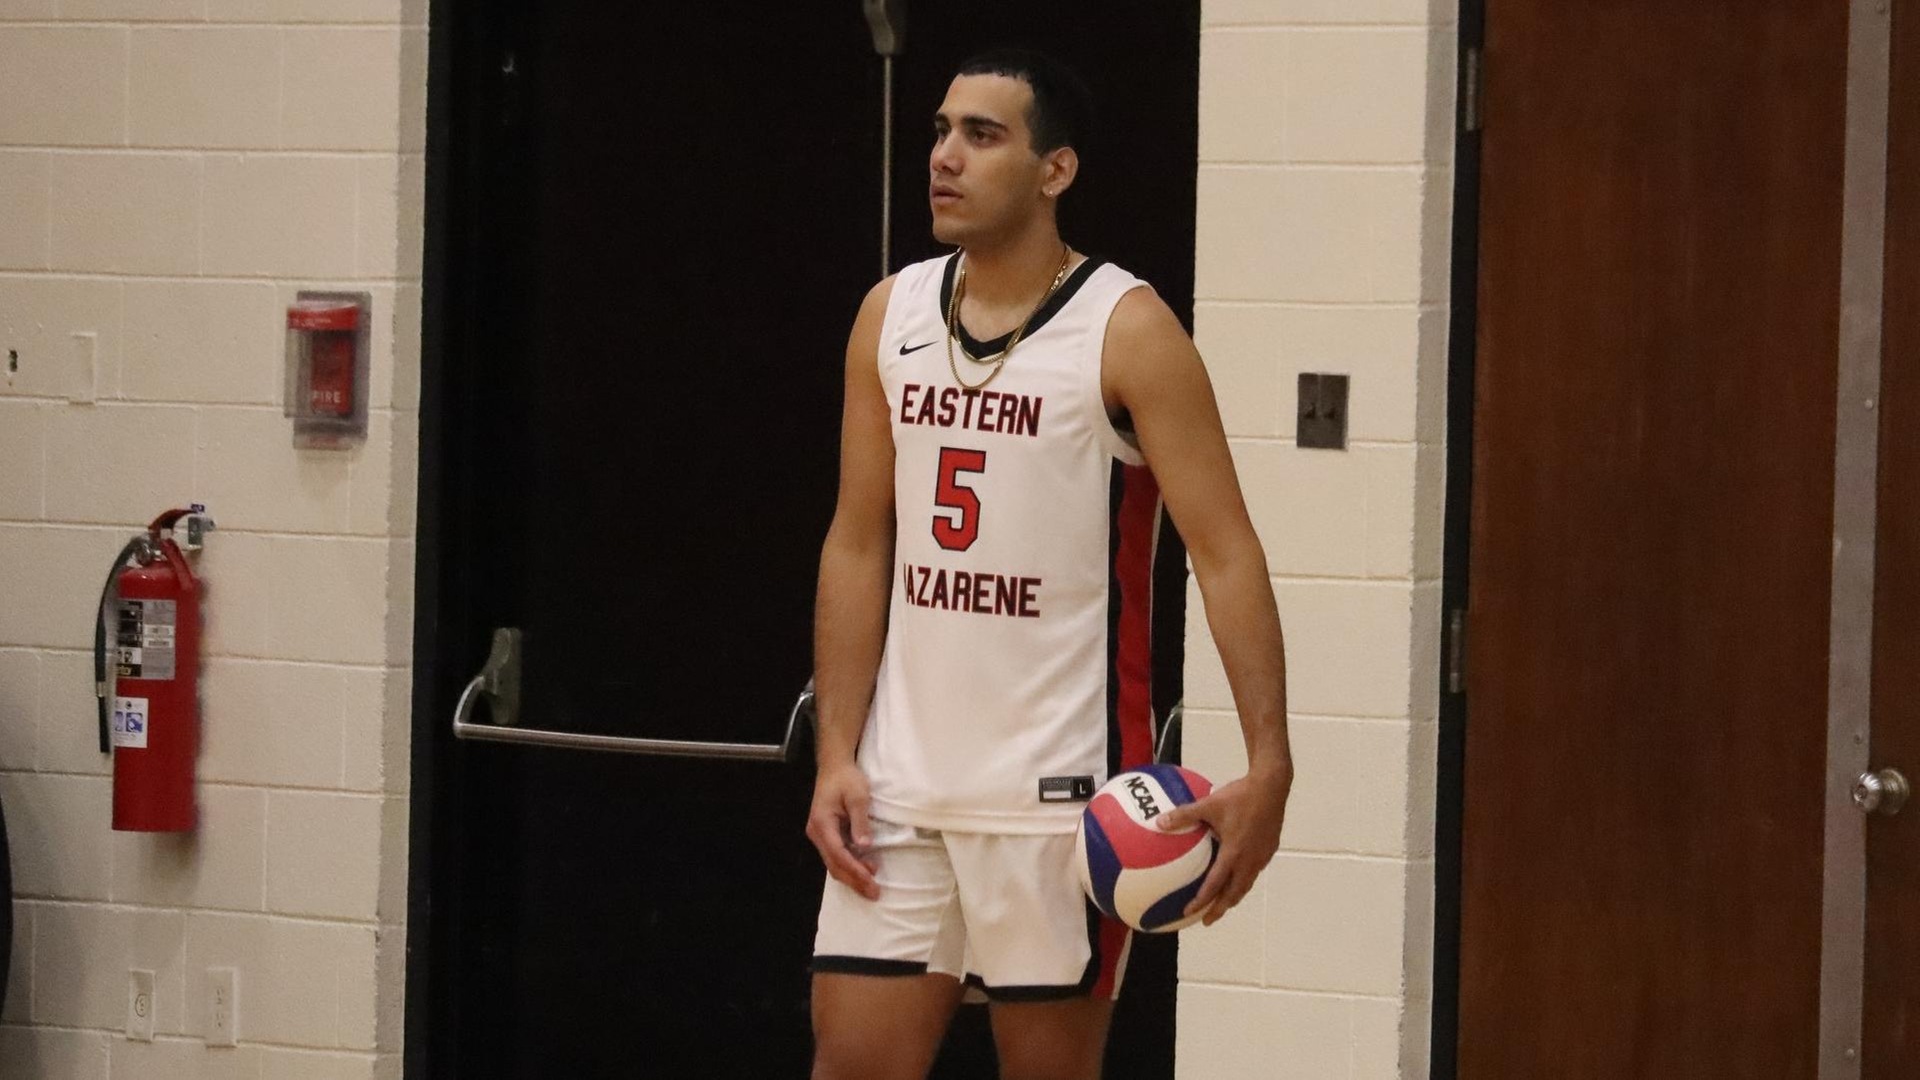 Men’s Volleyball’s Alejandro Garcia Fernandez Earns Fourth NEVC Player of the Week Honor